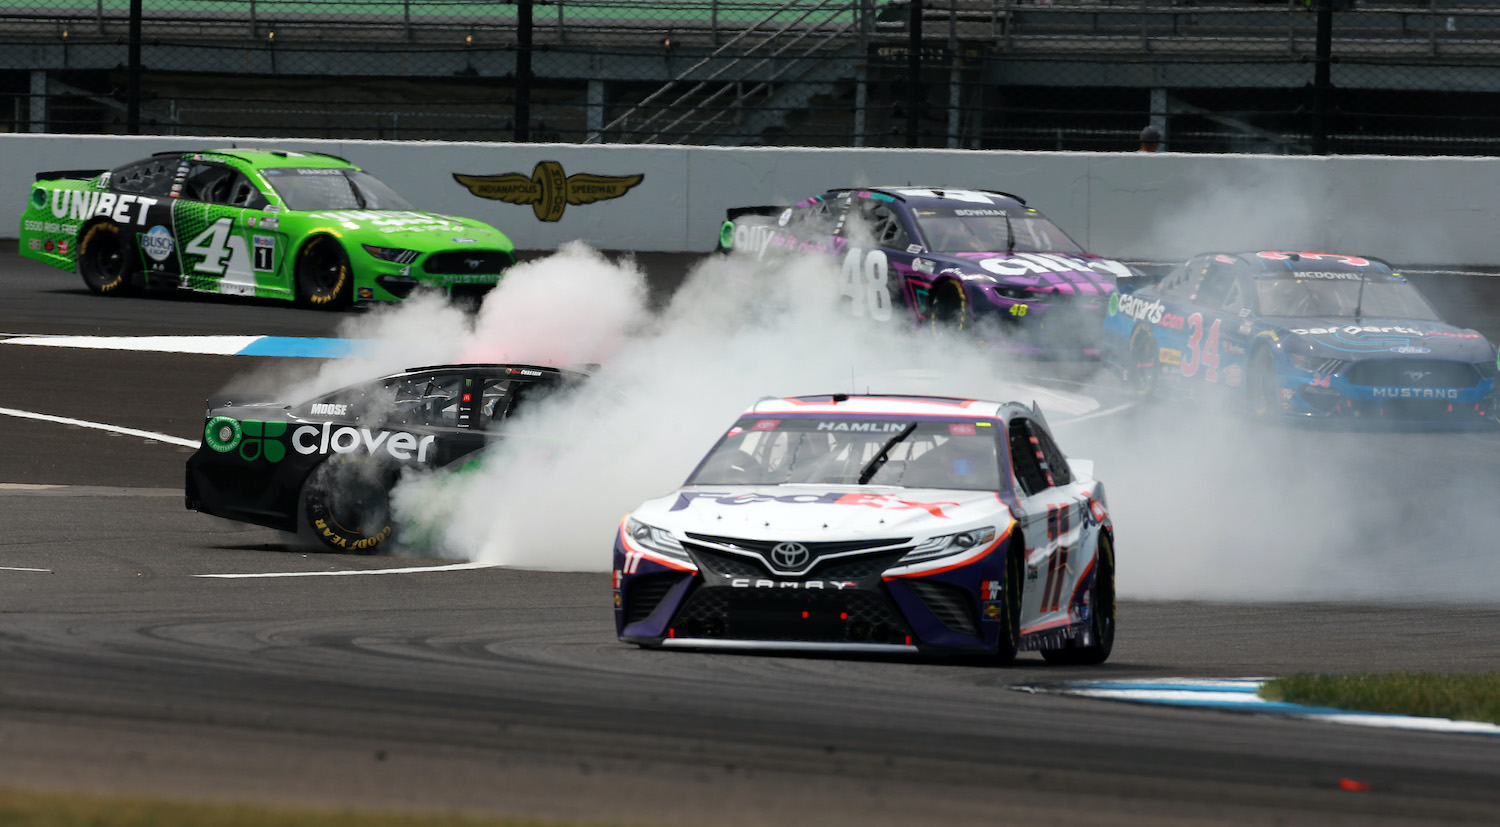 INDIANAPOLIS, INDIANA - AUGUST 15: Denny Hamlin, driver of the #11 FedEx Ground Toyota, Michael McDowell, driver of the #34 CarParts.com Ford, Alex Bowman, driver of the #48 Ally Chevrolet, and Kevin Harvick, driver of the #4 Unibet Ford, avoid Ross Chastain, driver of the #42 Clover Chevrolet, spin during the NASCAR Cup Series Verizon 200 at the Brickyard at Indianapolis Motor Speedway on August 15, 2021 in Indianapolis, Indiana. (Photo by Sean Gardner/Getty Images)